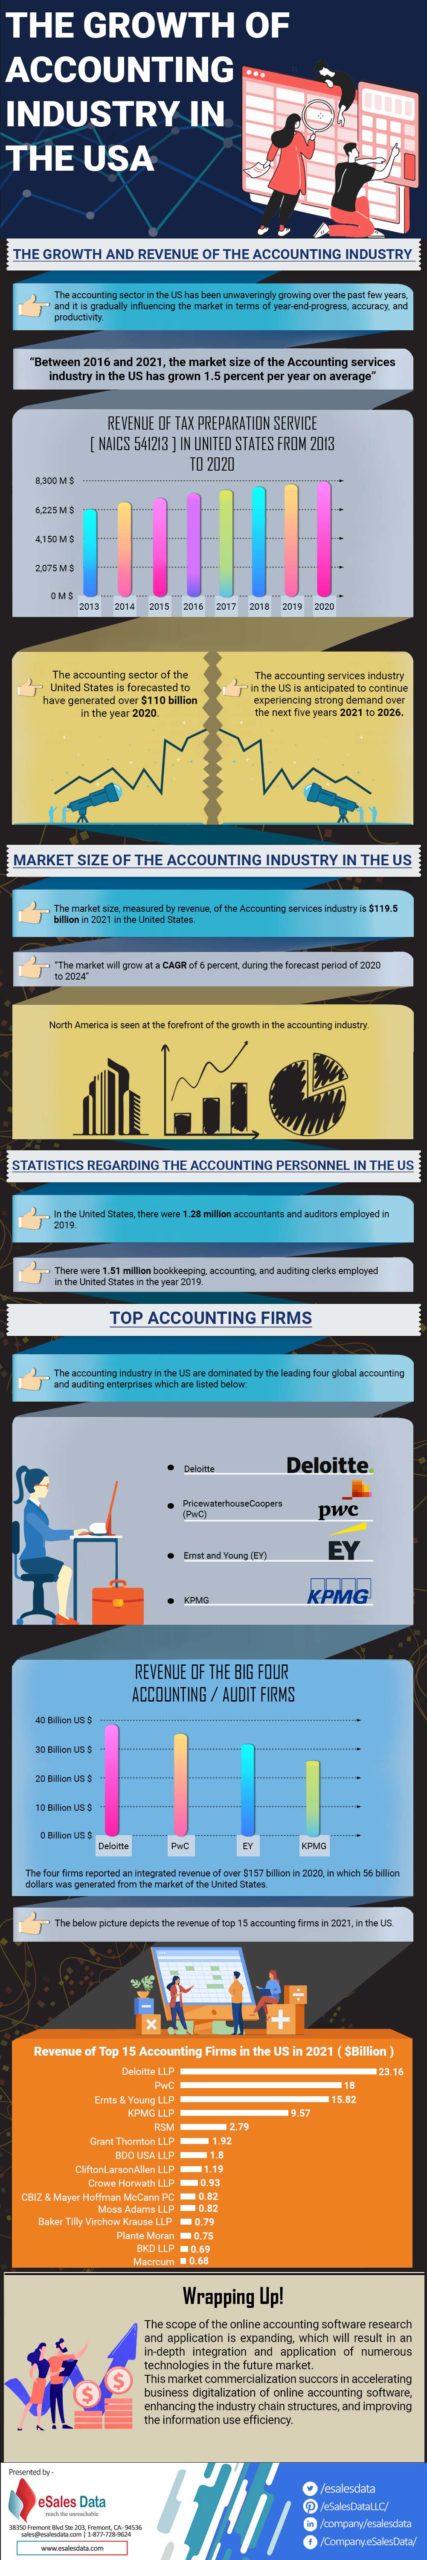 The Growth of Accounting Industry in the USA